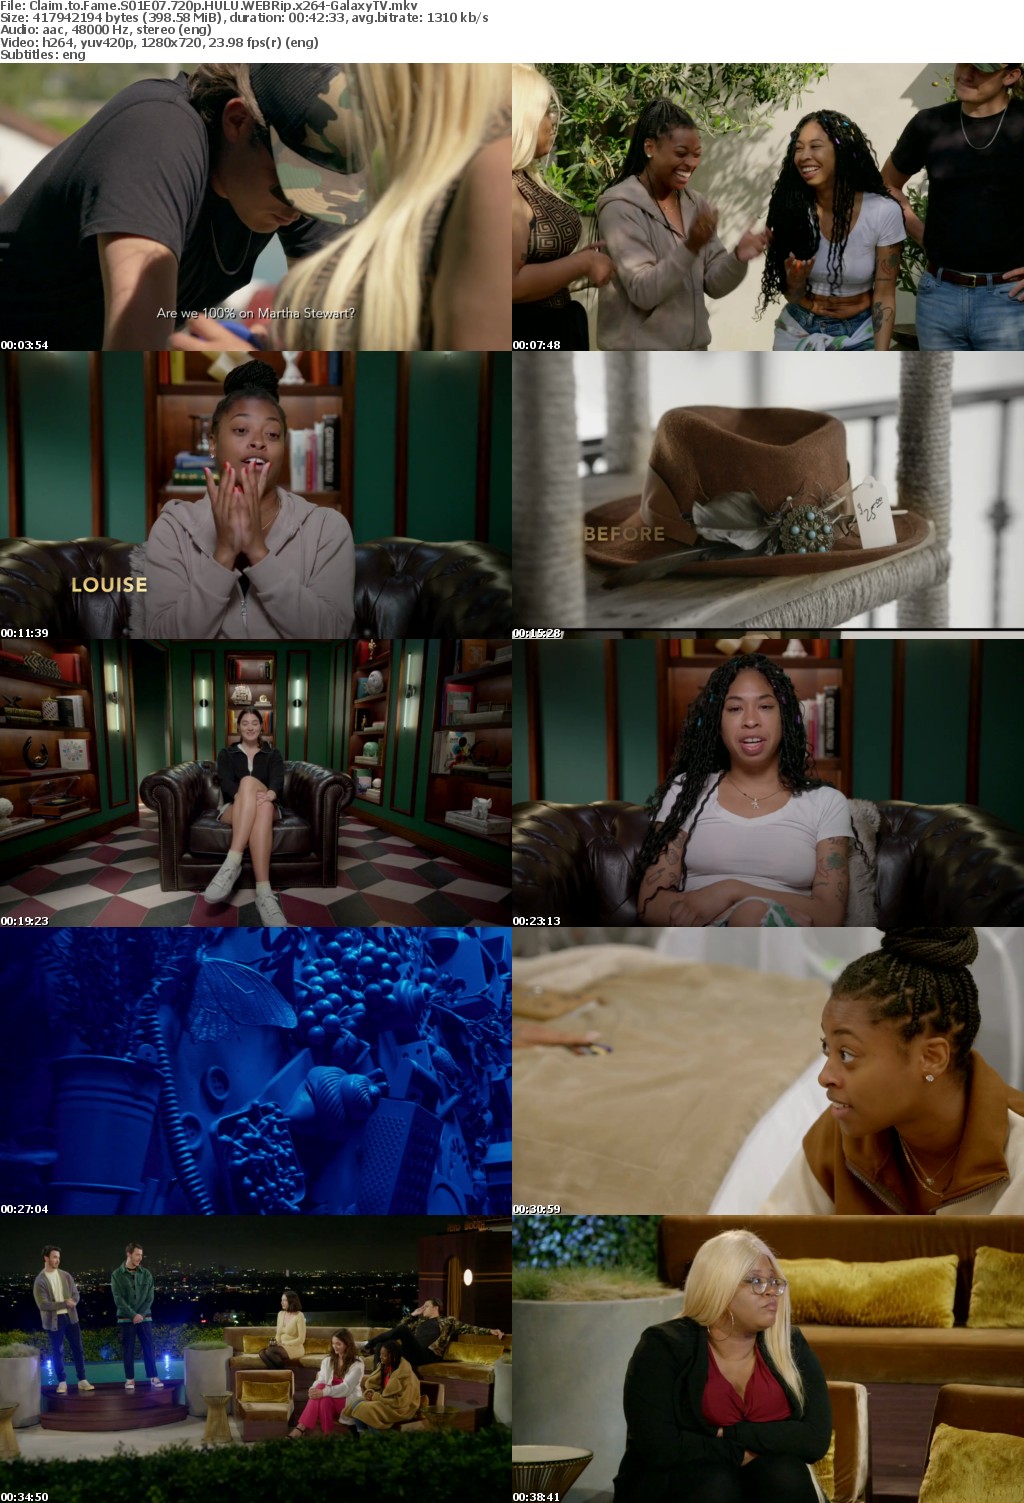 Claim to Fame S01 COMPLETE 720p HULU WEBRip x264-GalaxyTV